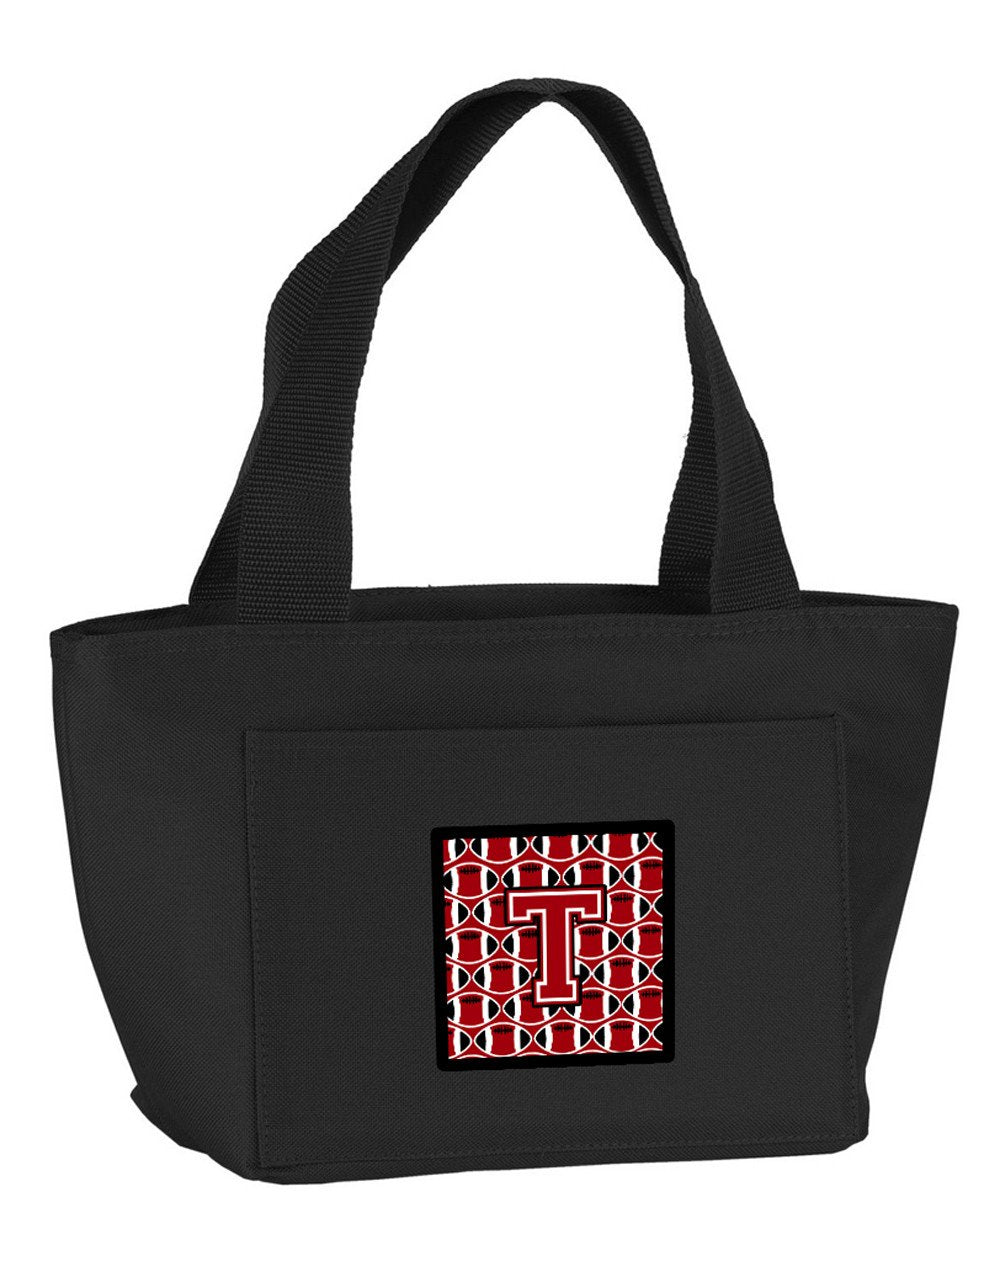 Letter T Football Red, Black and White Lunch Bag CJ1073-TBK-8808 by Caroline's Treasures